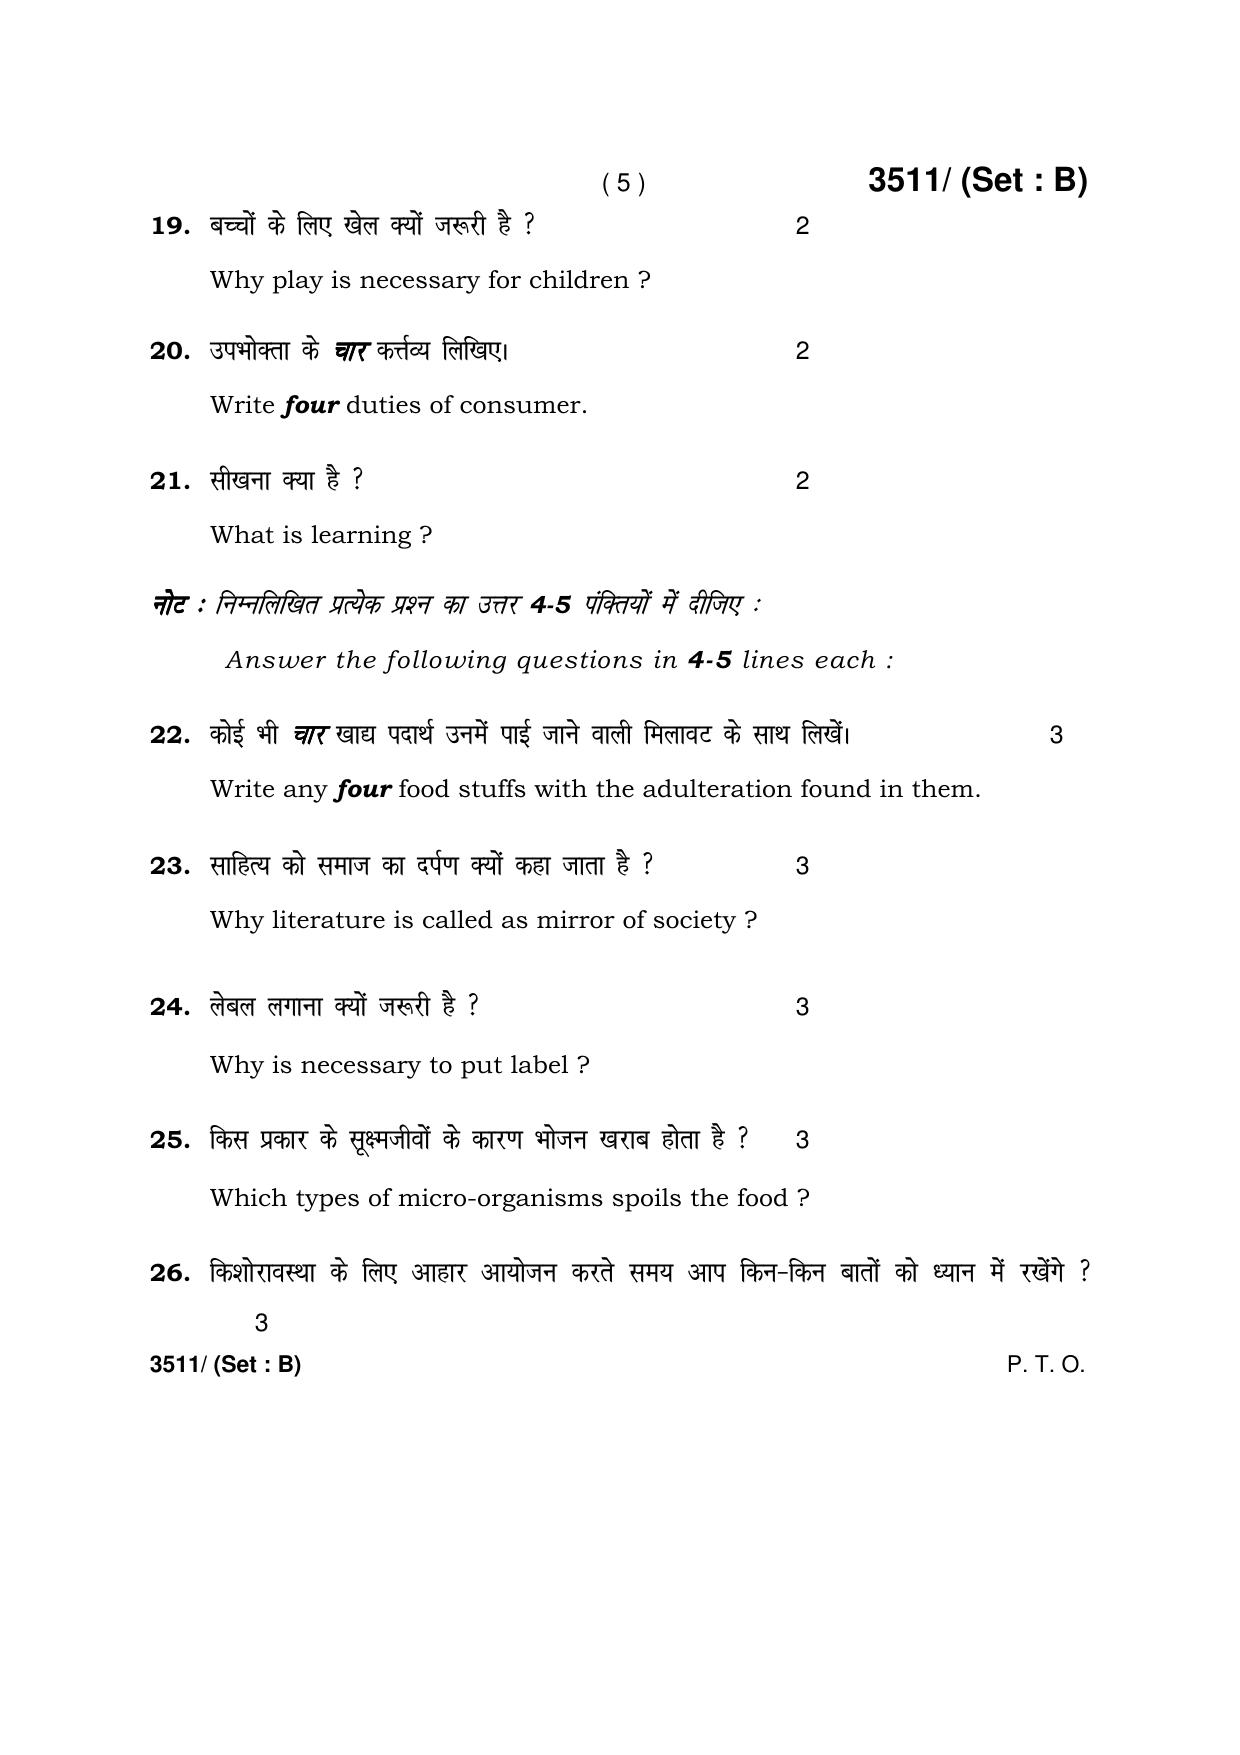 Haryana Board HBSE Class 10 Home Science -B 2018 Question Paper - Page 5